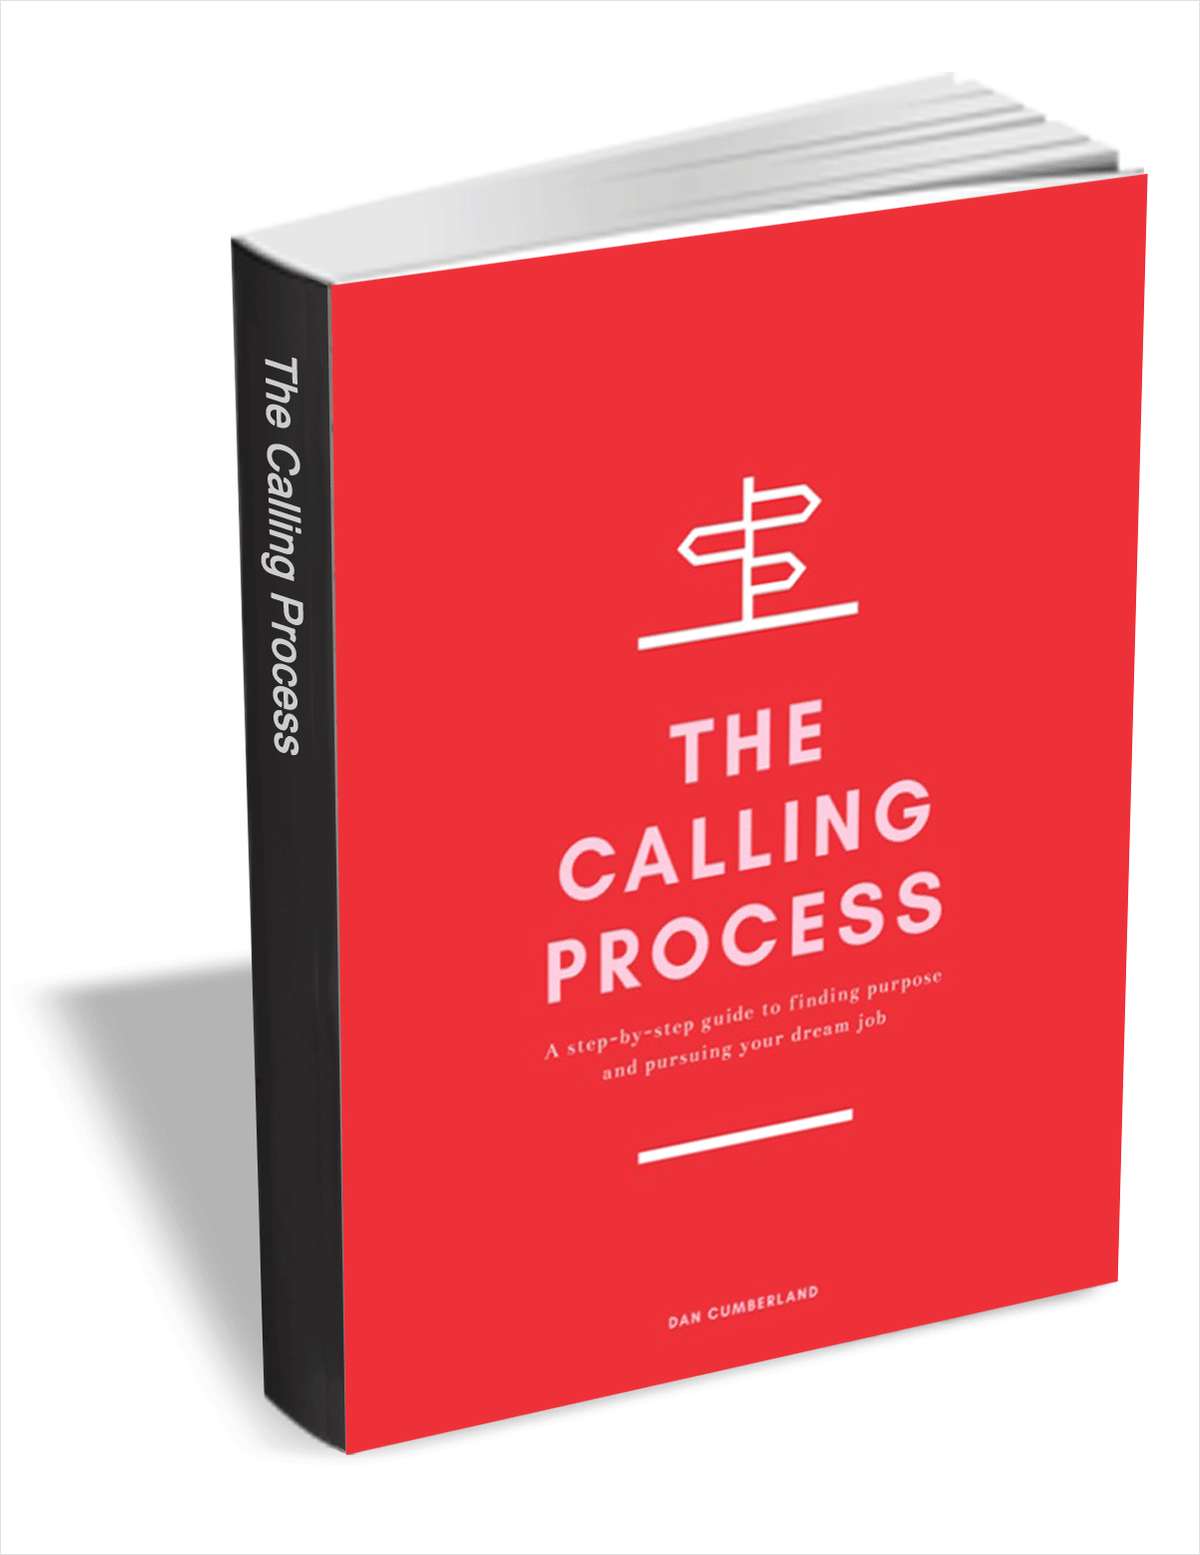 The Calling Process - A Step-by-Step Guide to Finding Purpose and Pursuing Your Dream Job